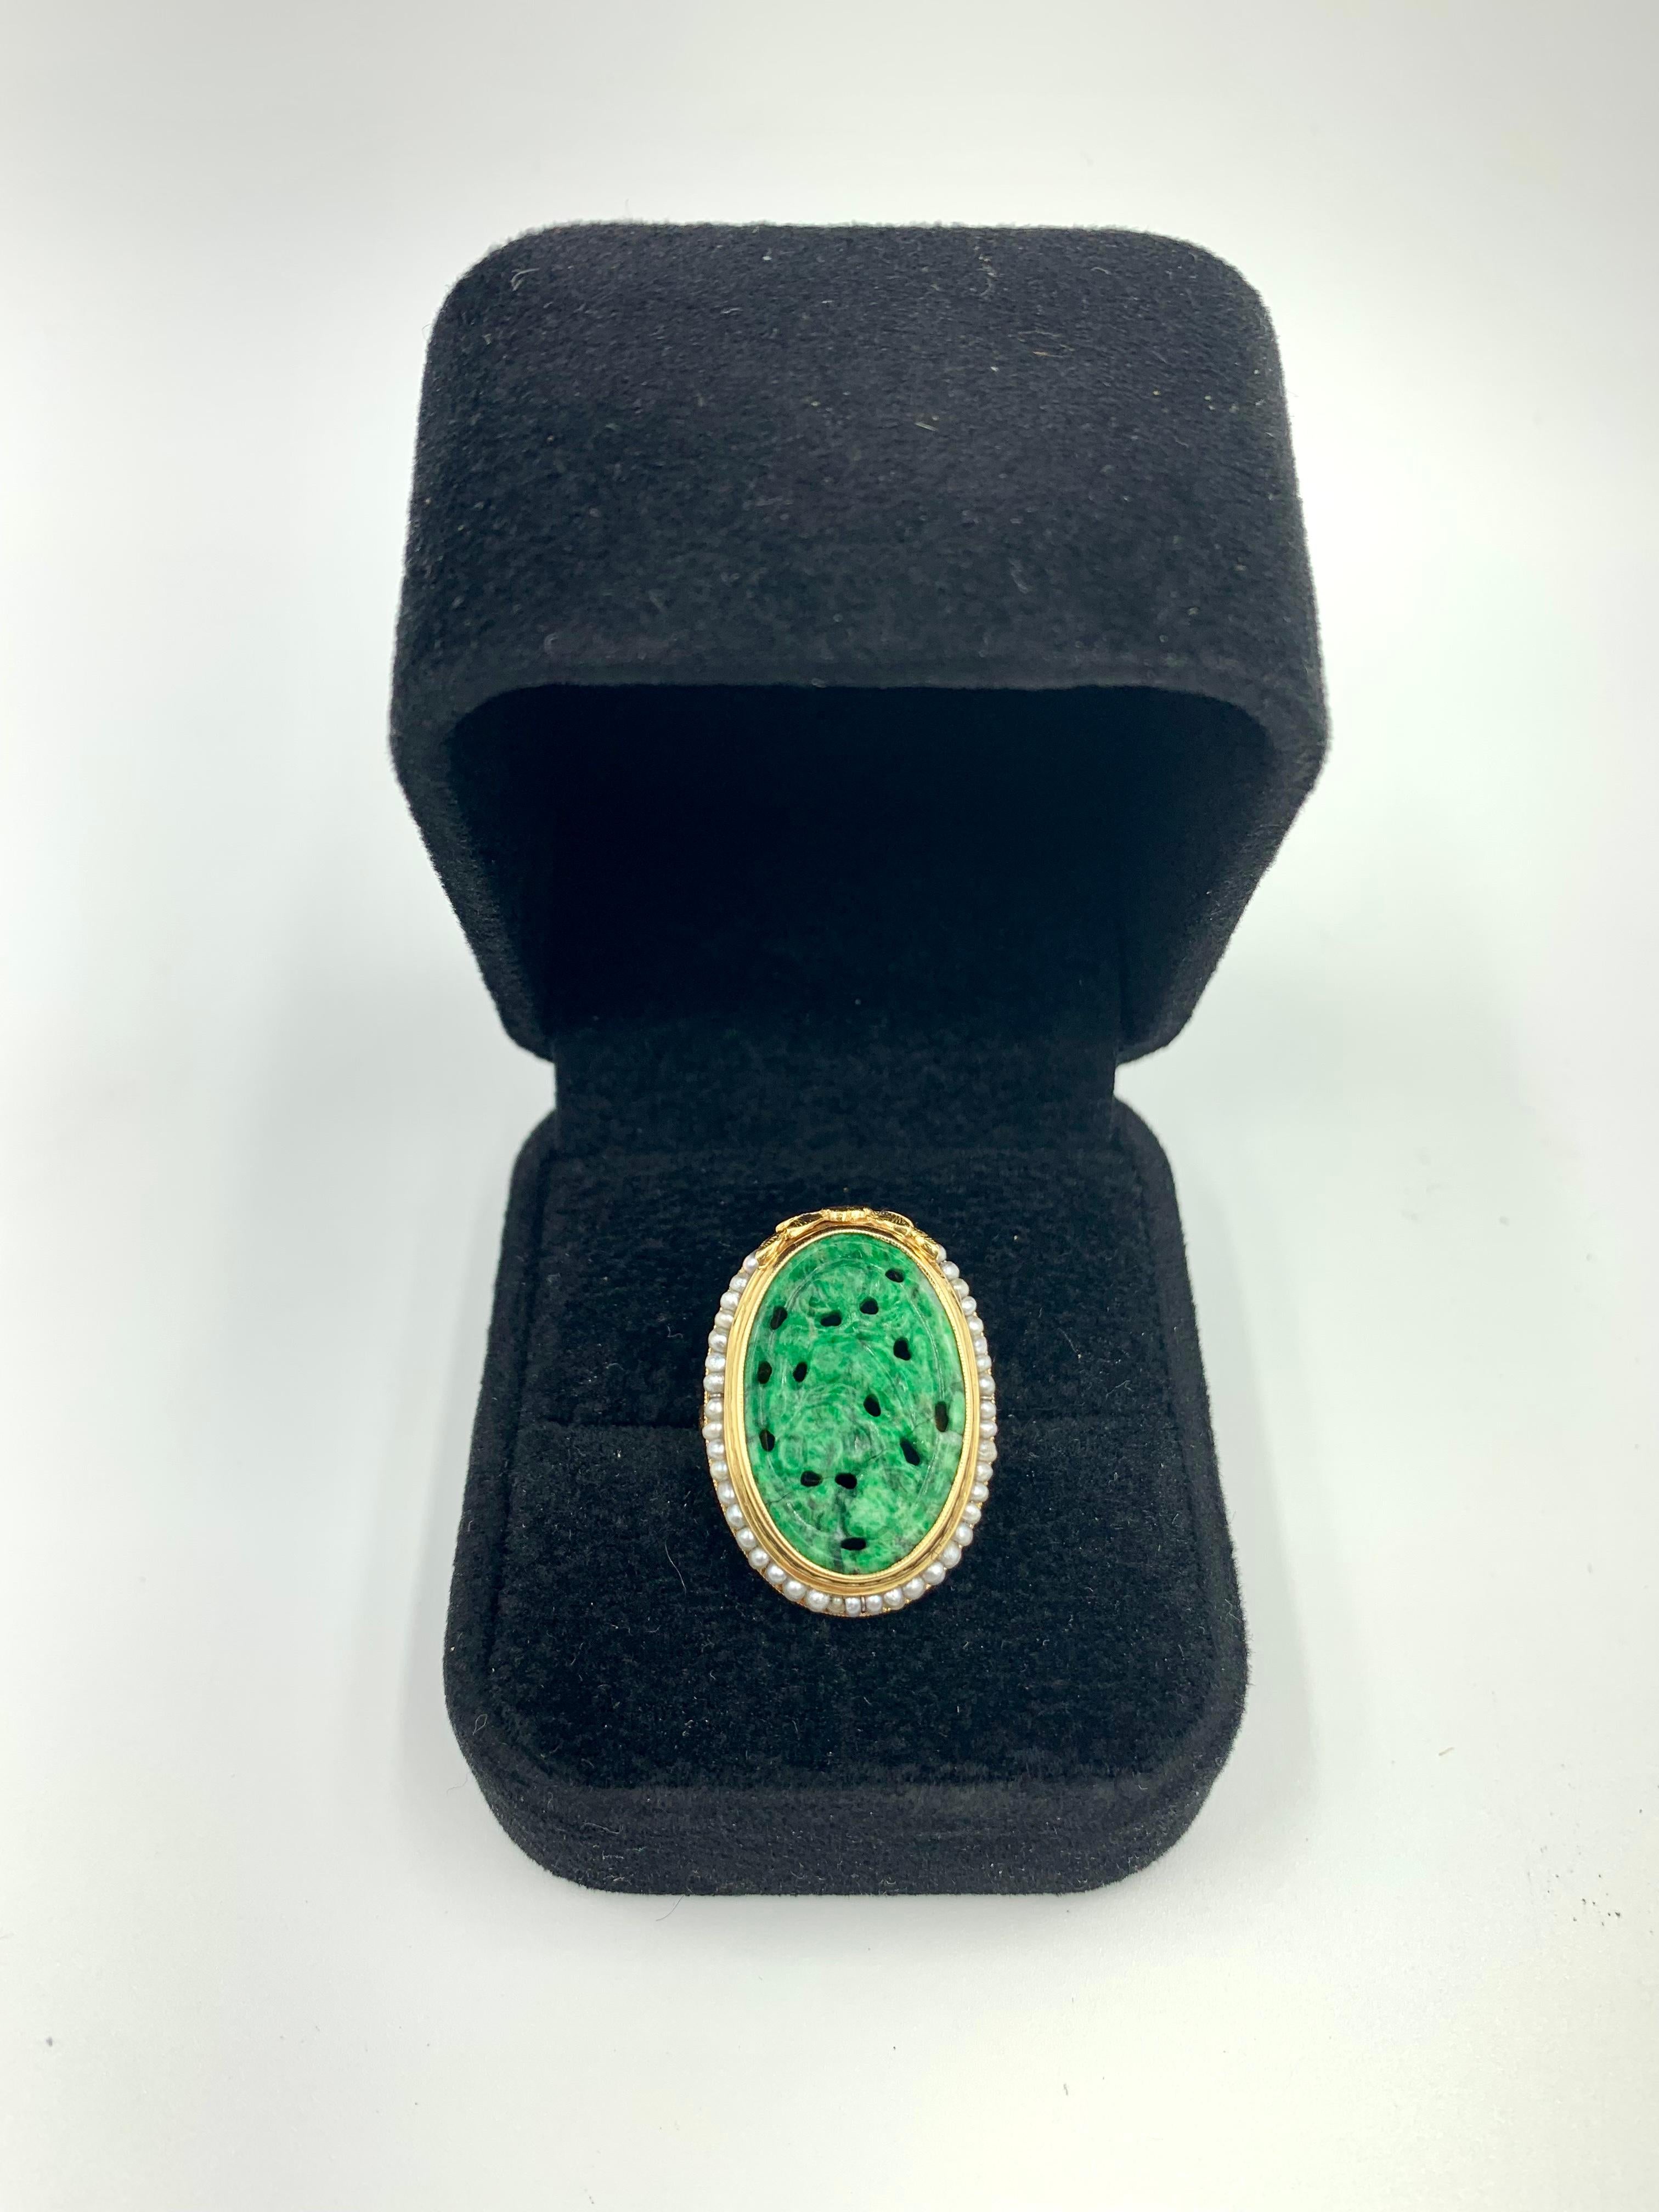 Fine antique Edwardian period natural carved reticulated apple green Chinese jade ring with a Laurel leaf gold crest surrounded by natural seed pearls and a beautifully engraved 14K gold setting. The jade is apple green with lovely deep forest green